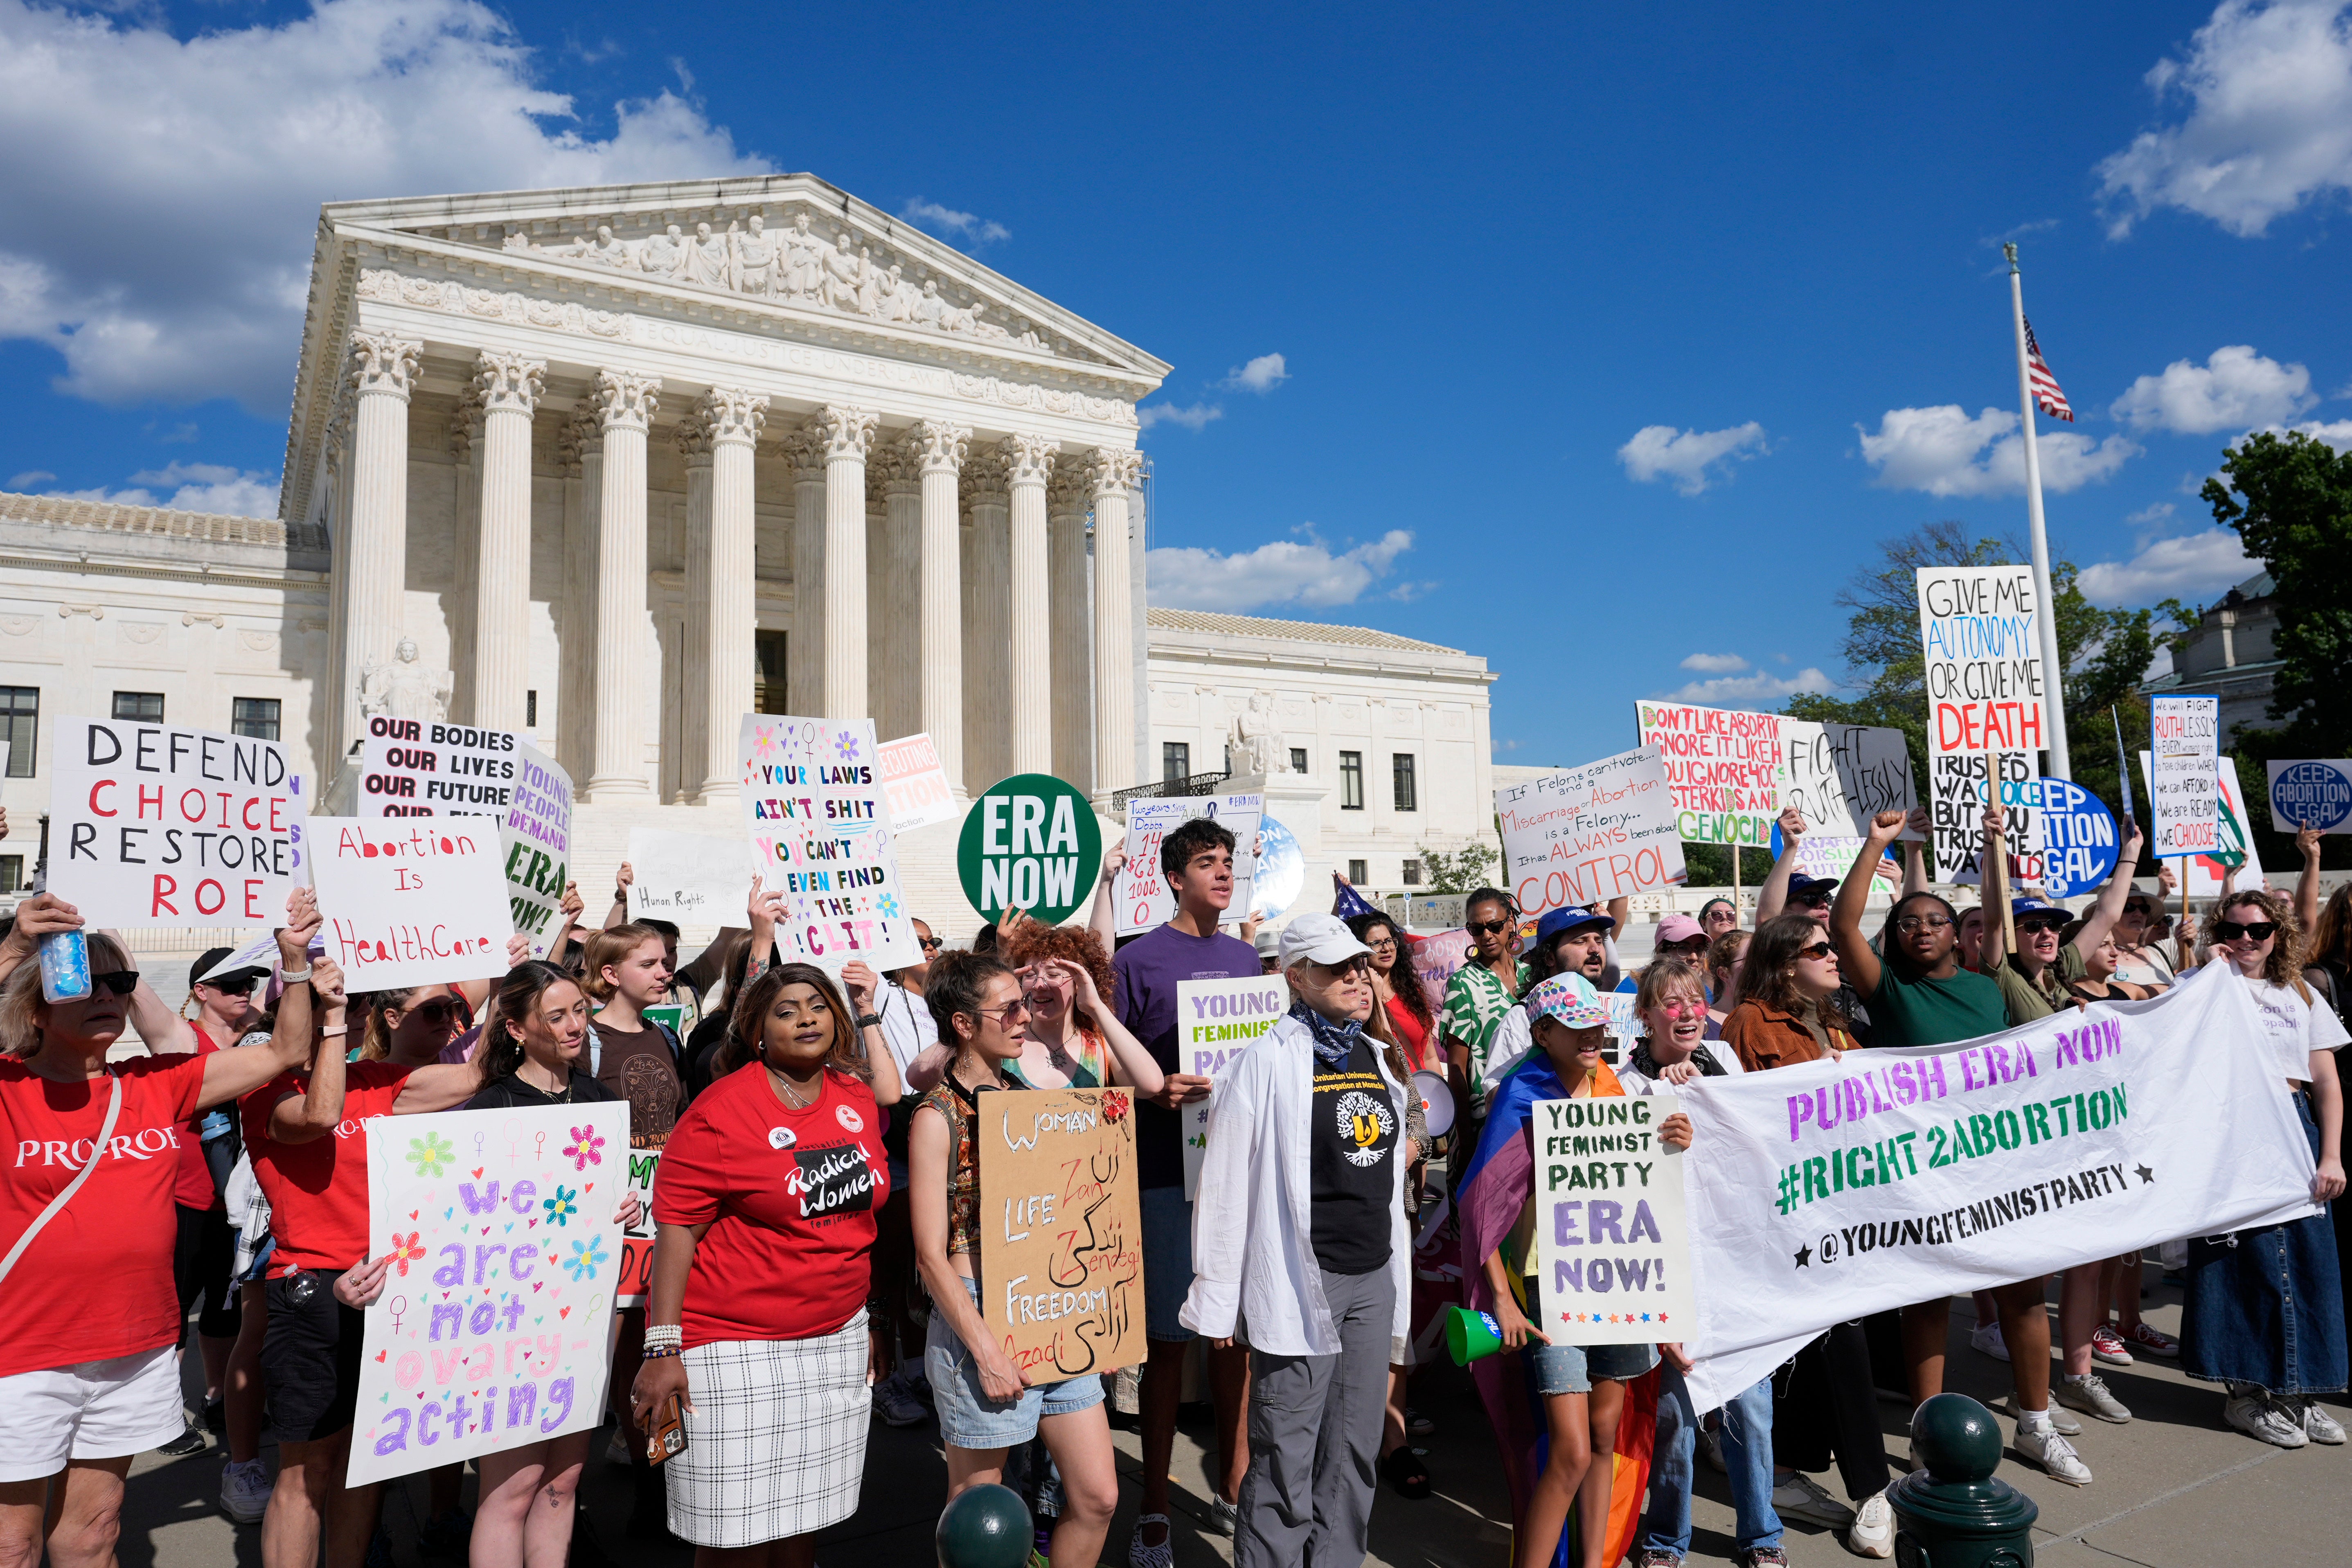 Abortion advocates tempered excitement over the Supreme Court ruling that allowed hospitals to perform abortions in Idaho, and instead gave ominous warnings